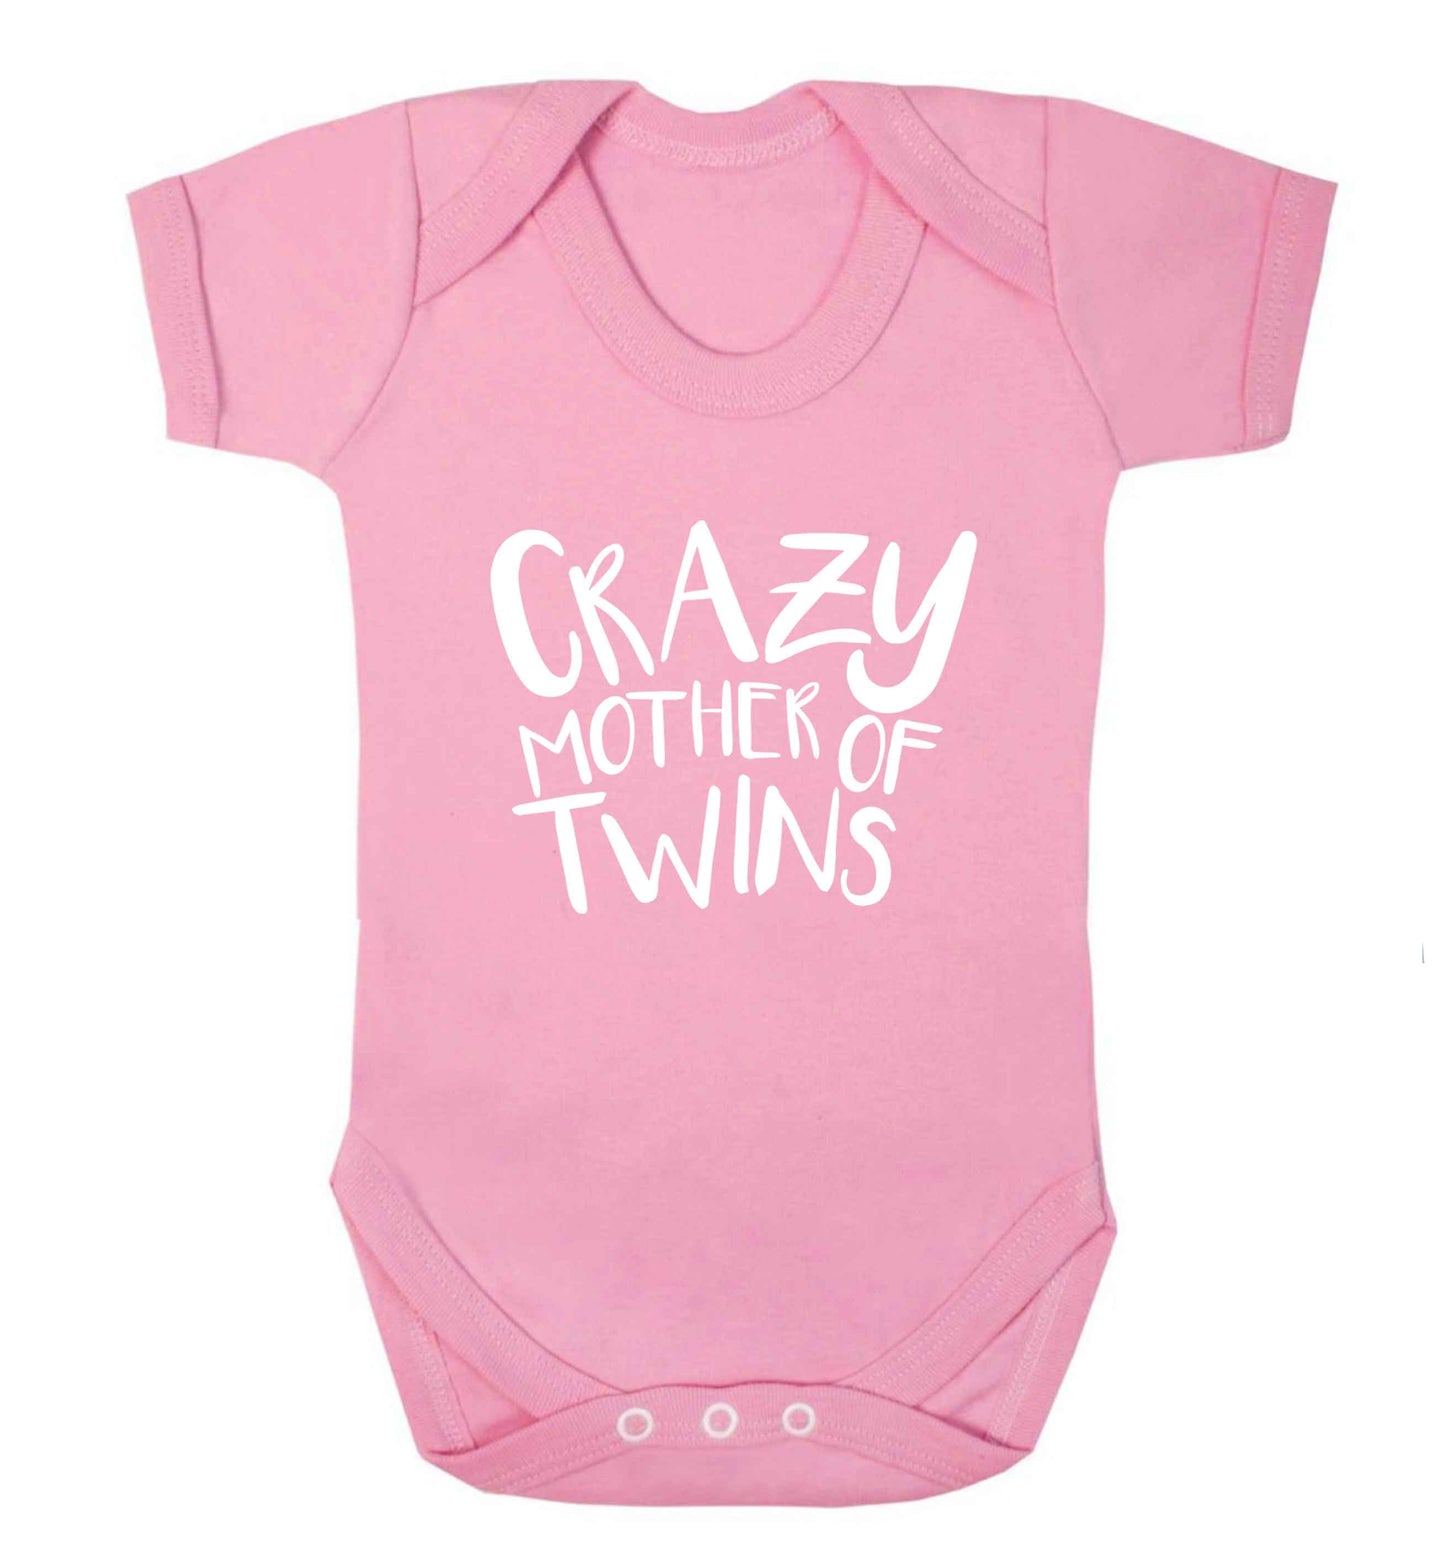 Crazy mother of twins baby vest pale pink 18-24 months